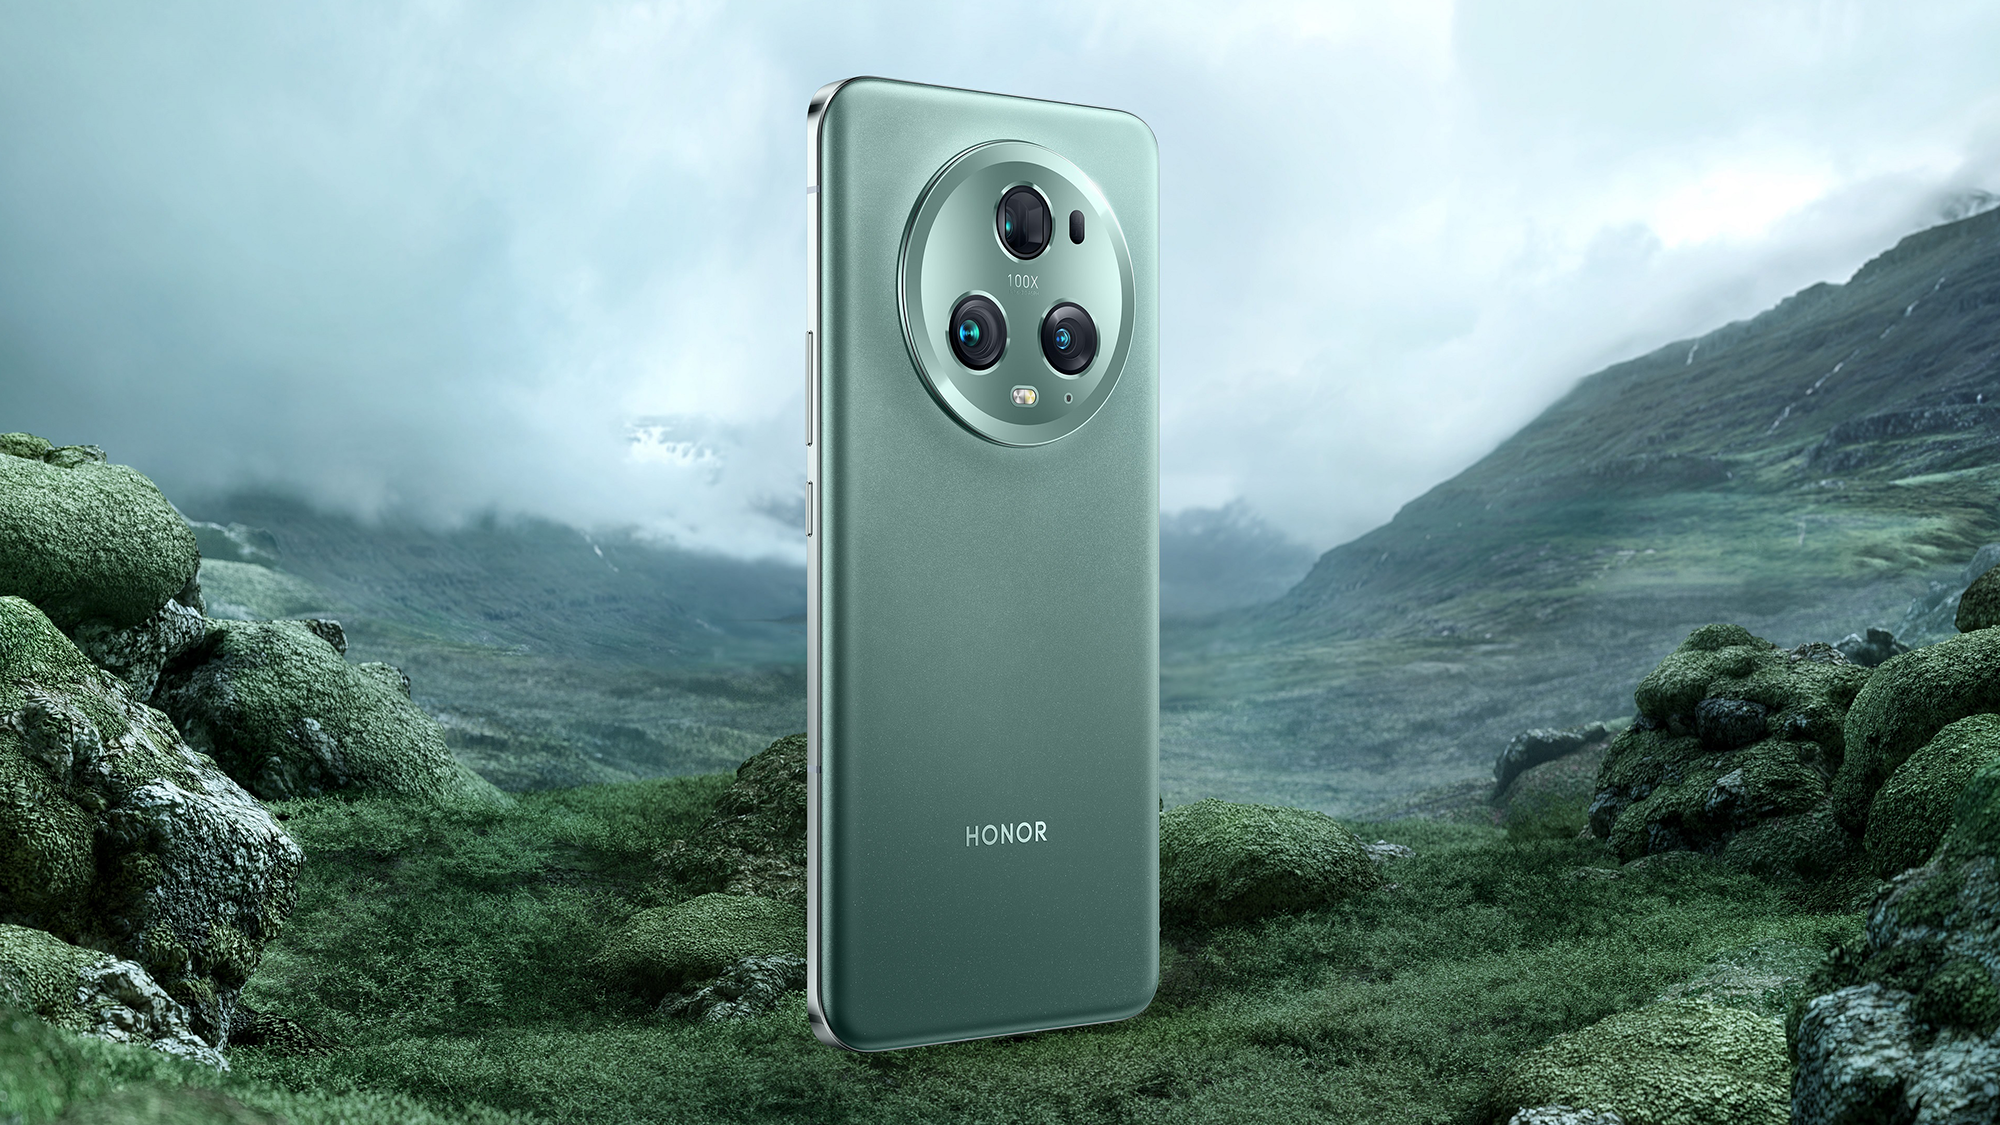 Honor Magic 5 Pro - the best camera phone in the world according to DxOMark